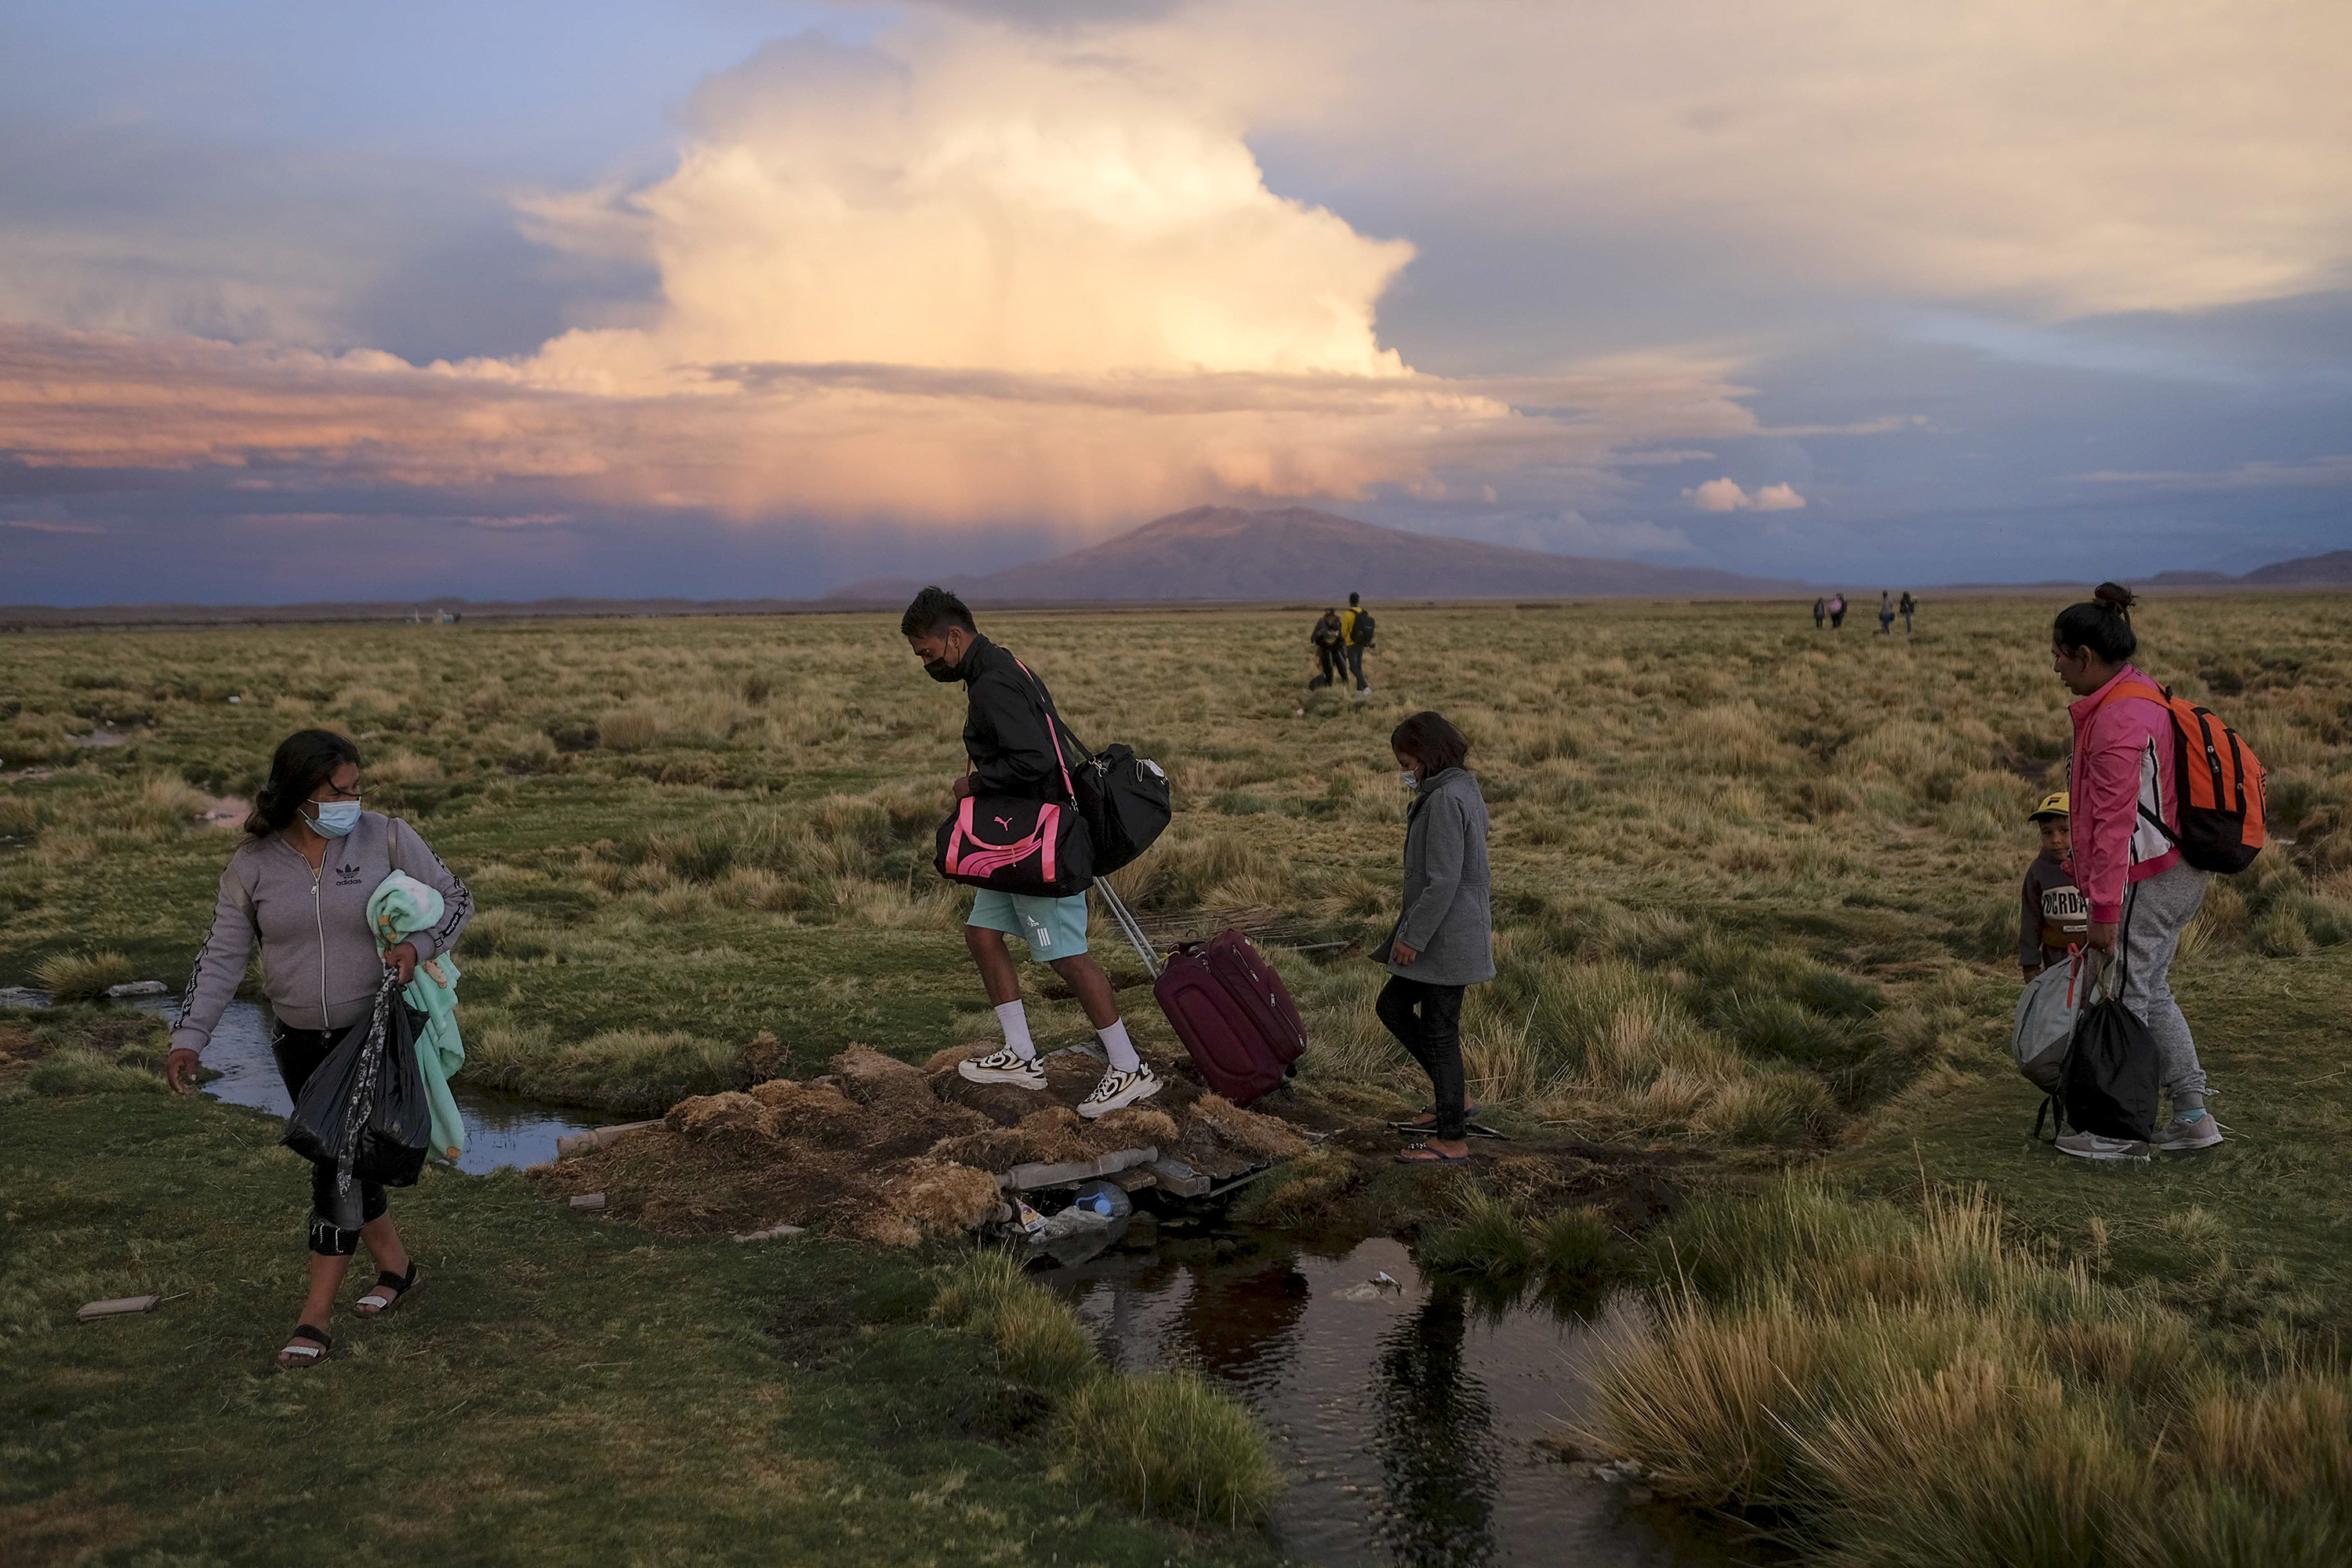 People carrying luggage and other belongings walk past a small stream of water amid a barren landscape